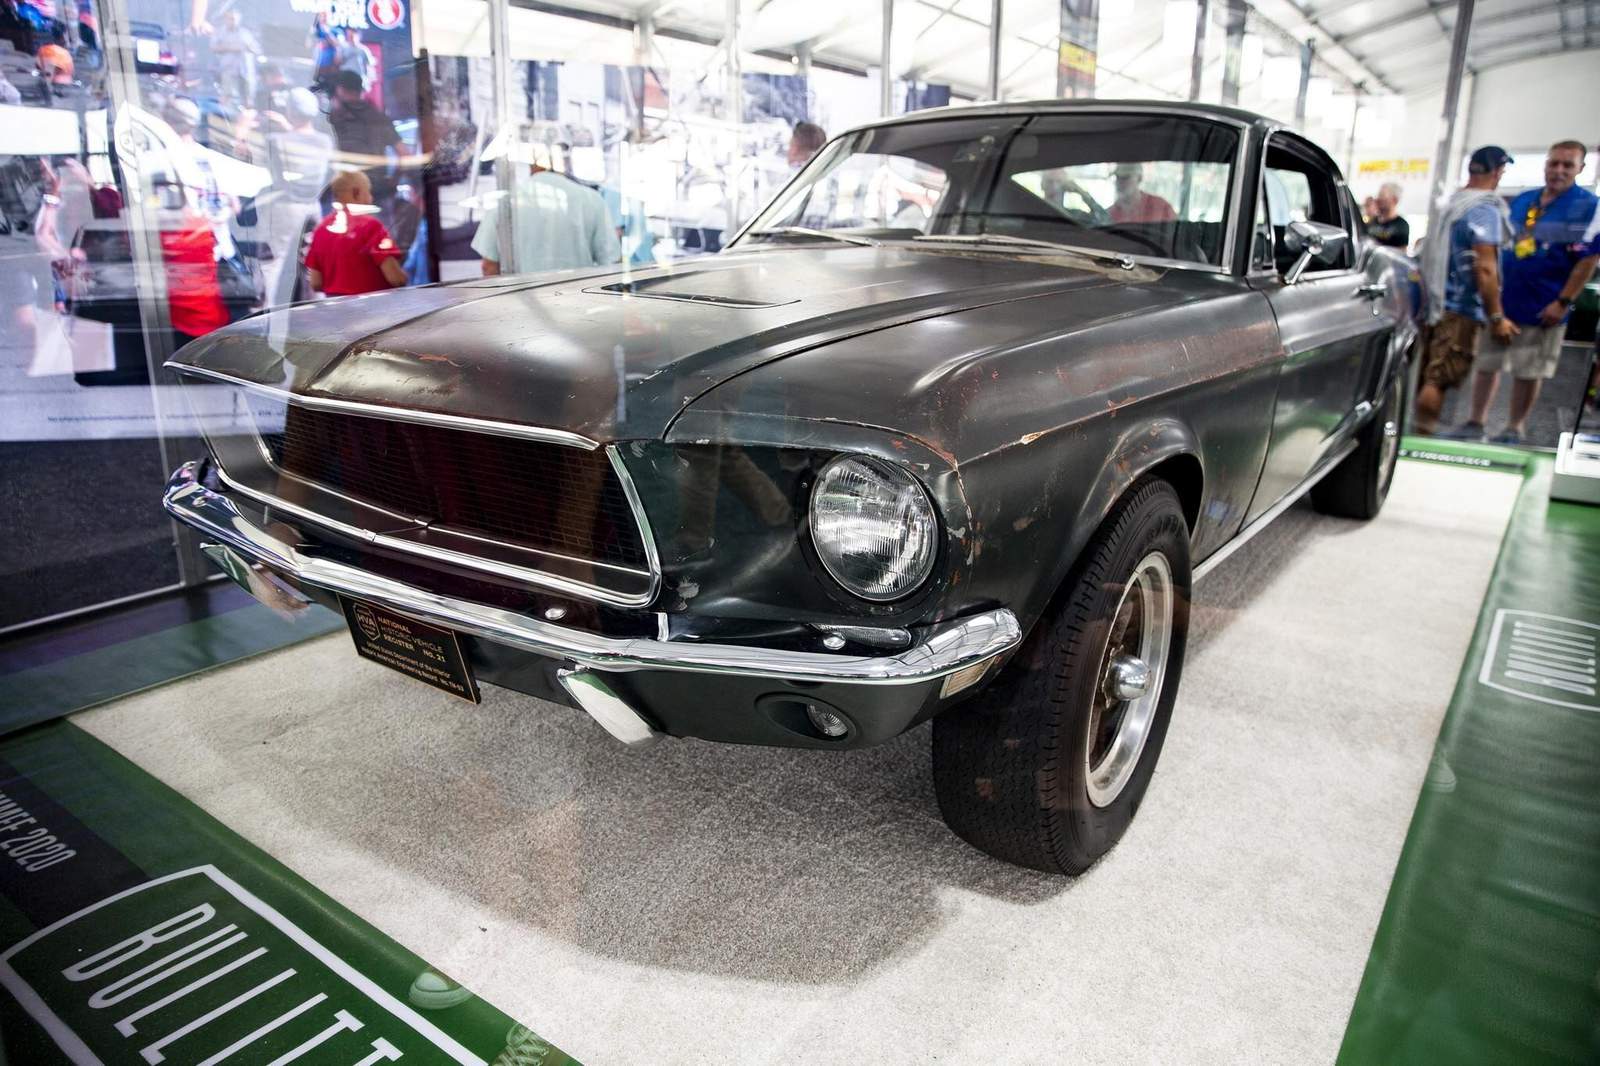 News 6/360: NASA’s new class and a really expensive Mustang